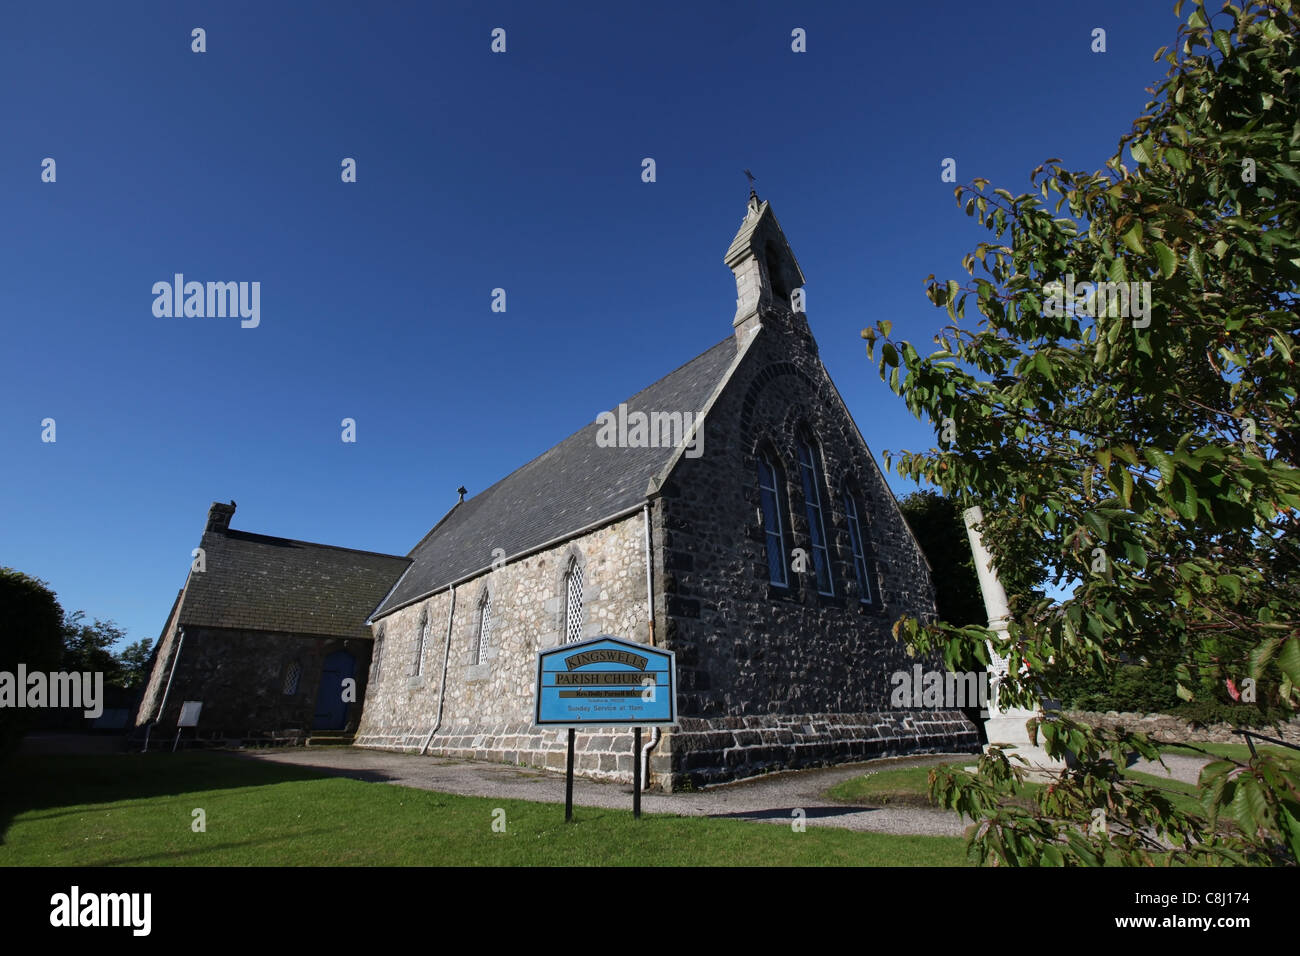 Kingswells church in the commuter village of KIngswells on the outskirts of the city of Aberdeen, Scotland, UK Stock Photo